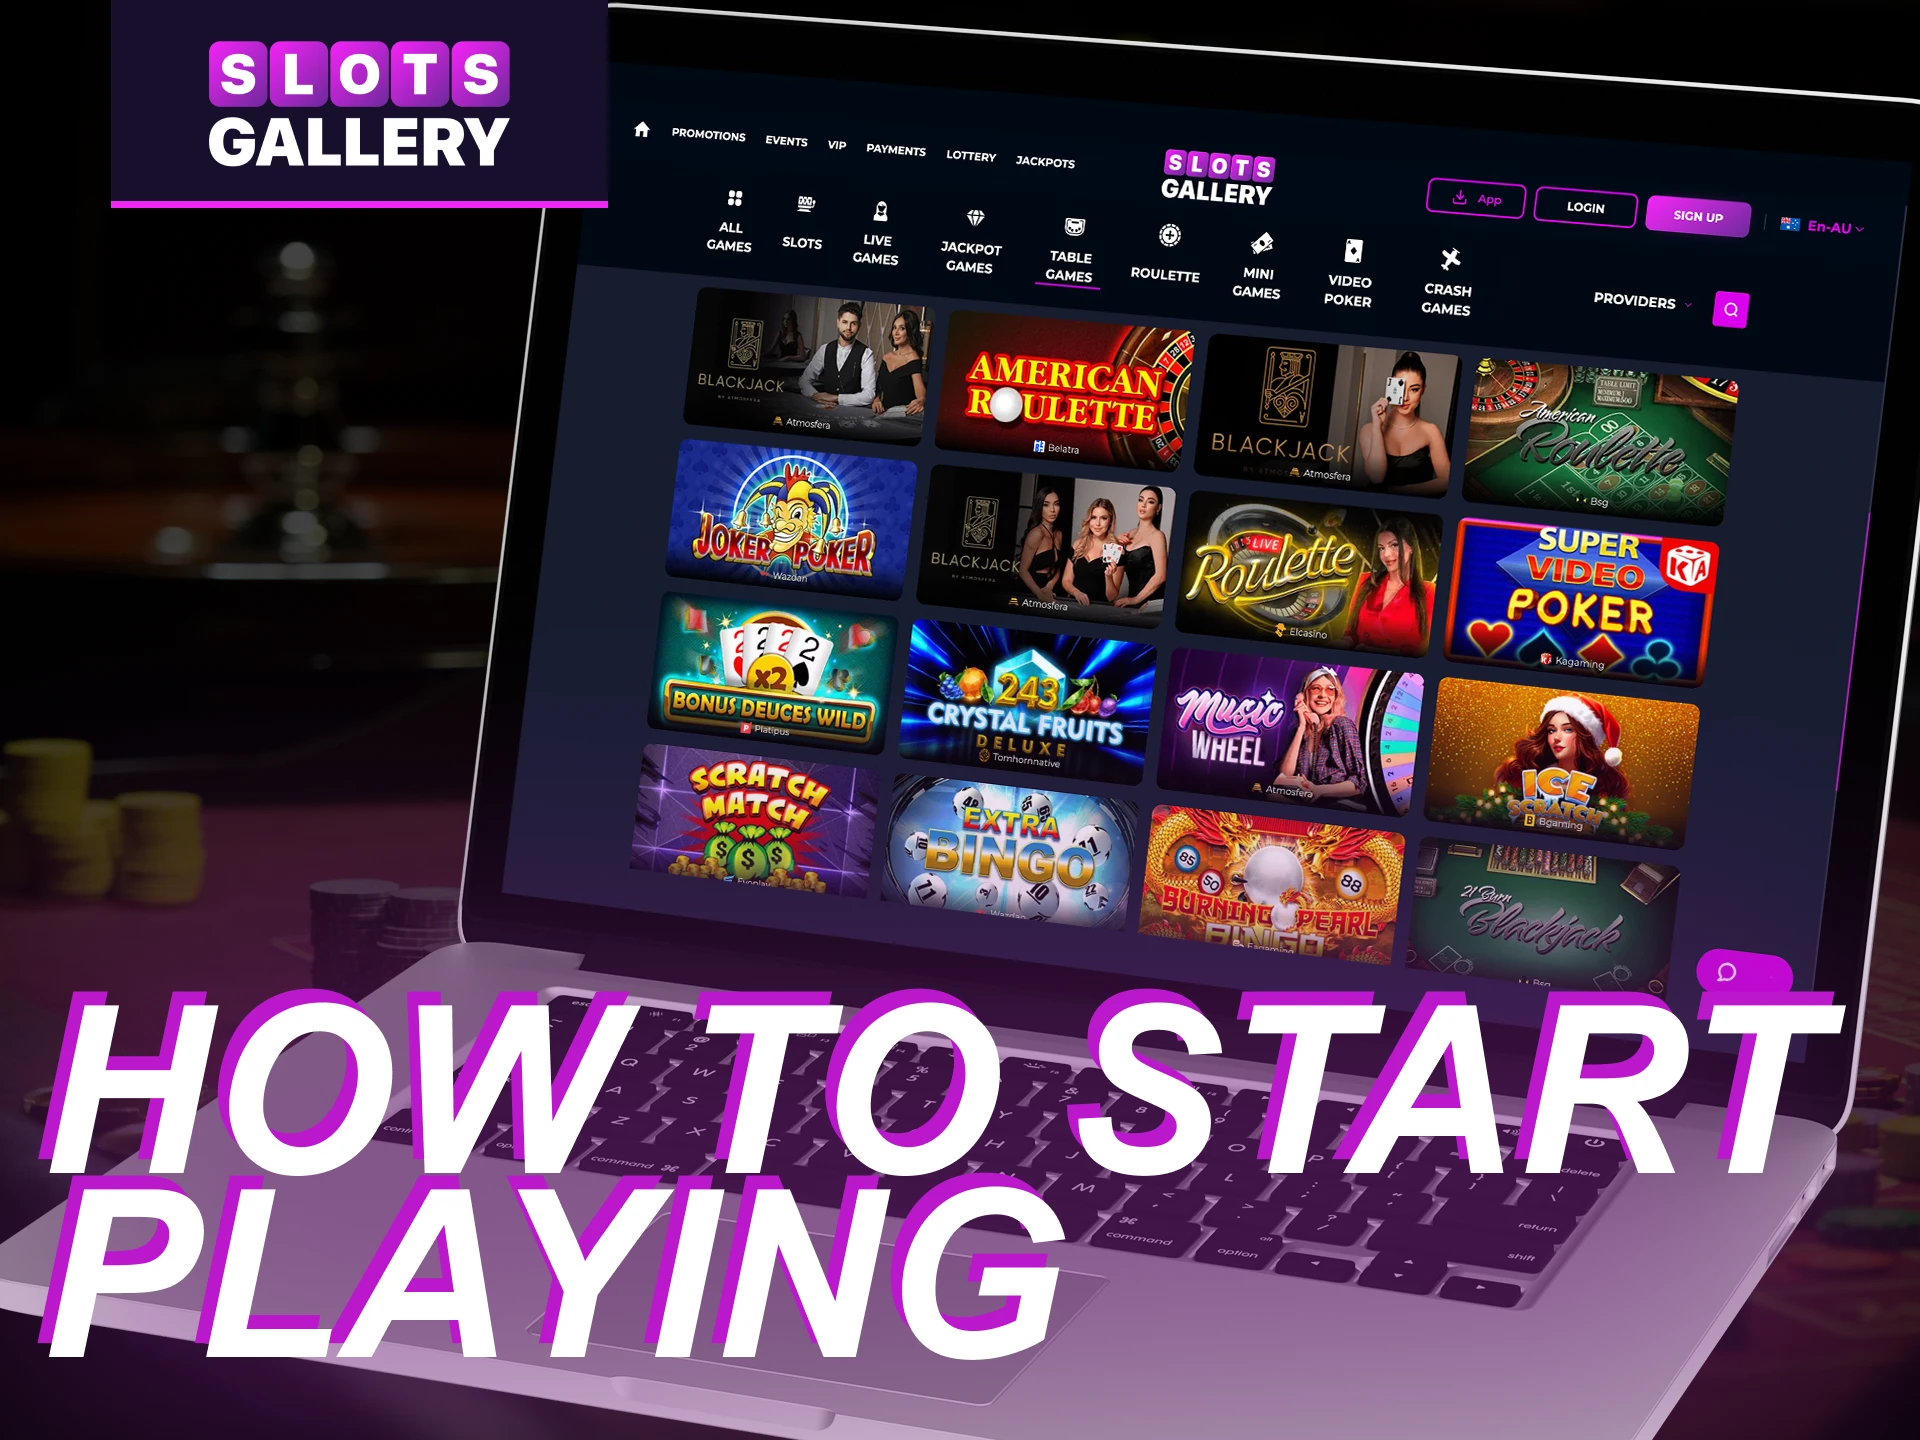 What does a player need to do to start playing table games at the Slots Gallery online casino.